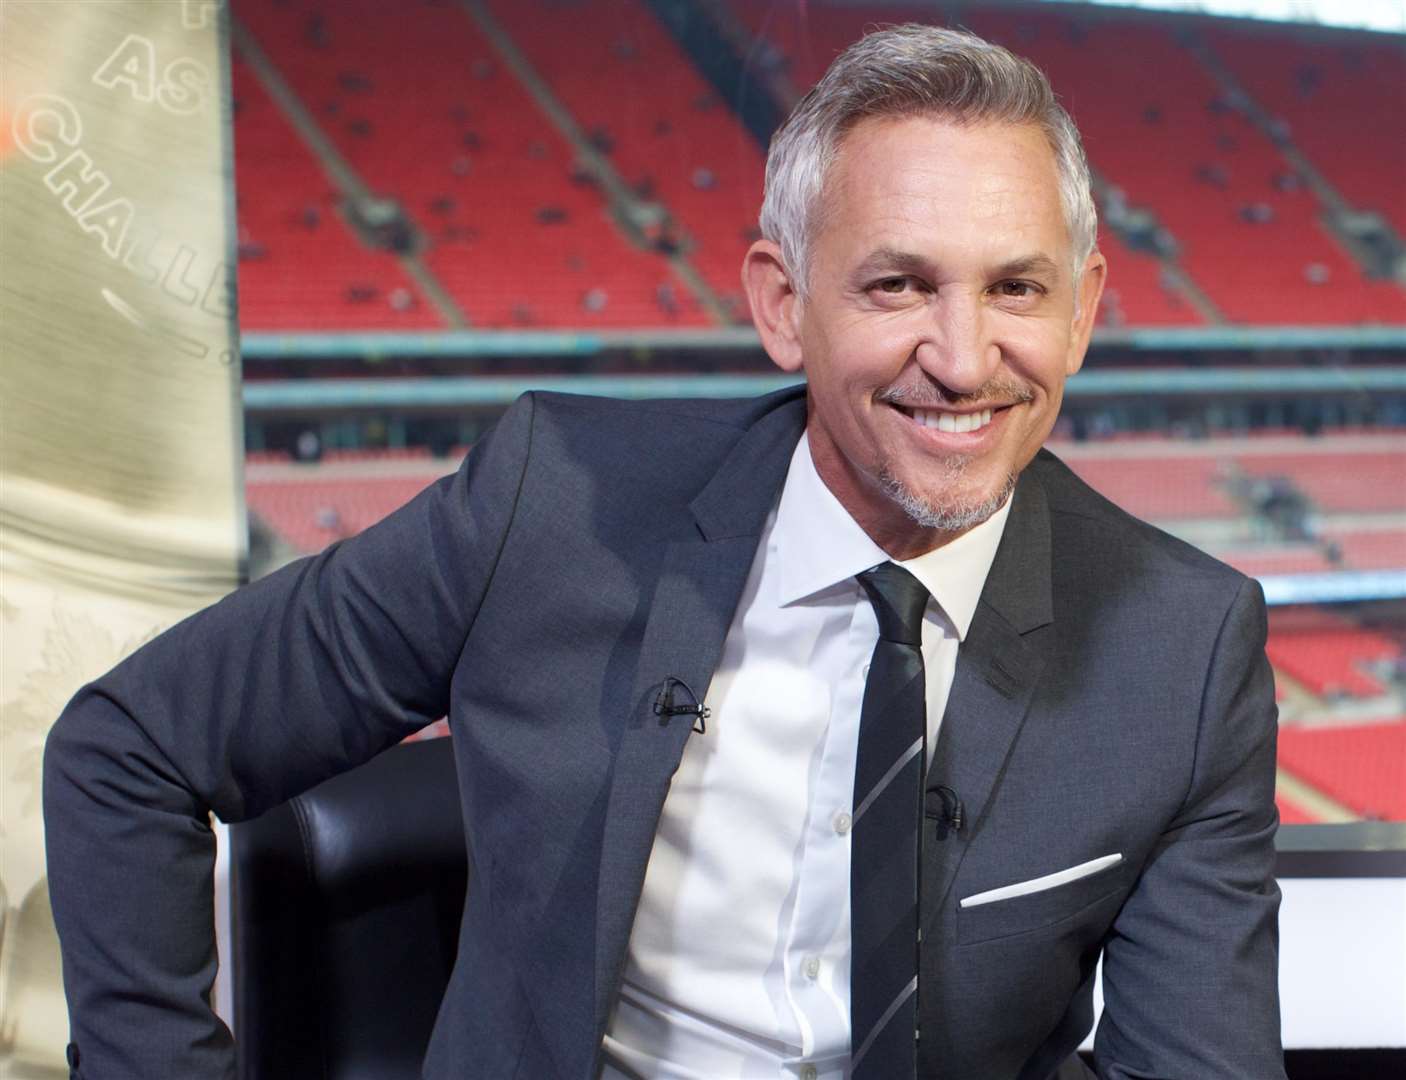 Gary Lineker will host coverage of the FA Cup final on BBC1